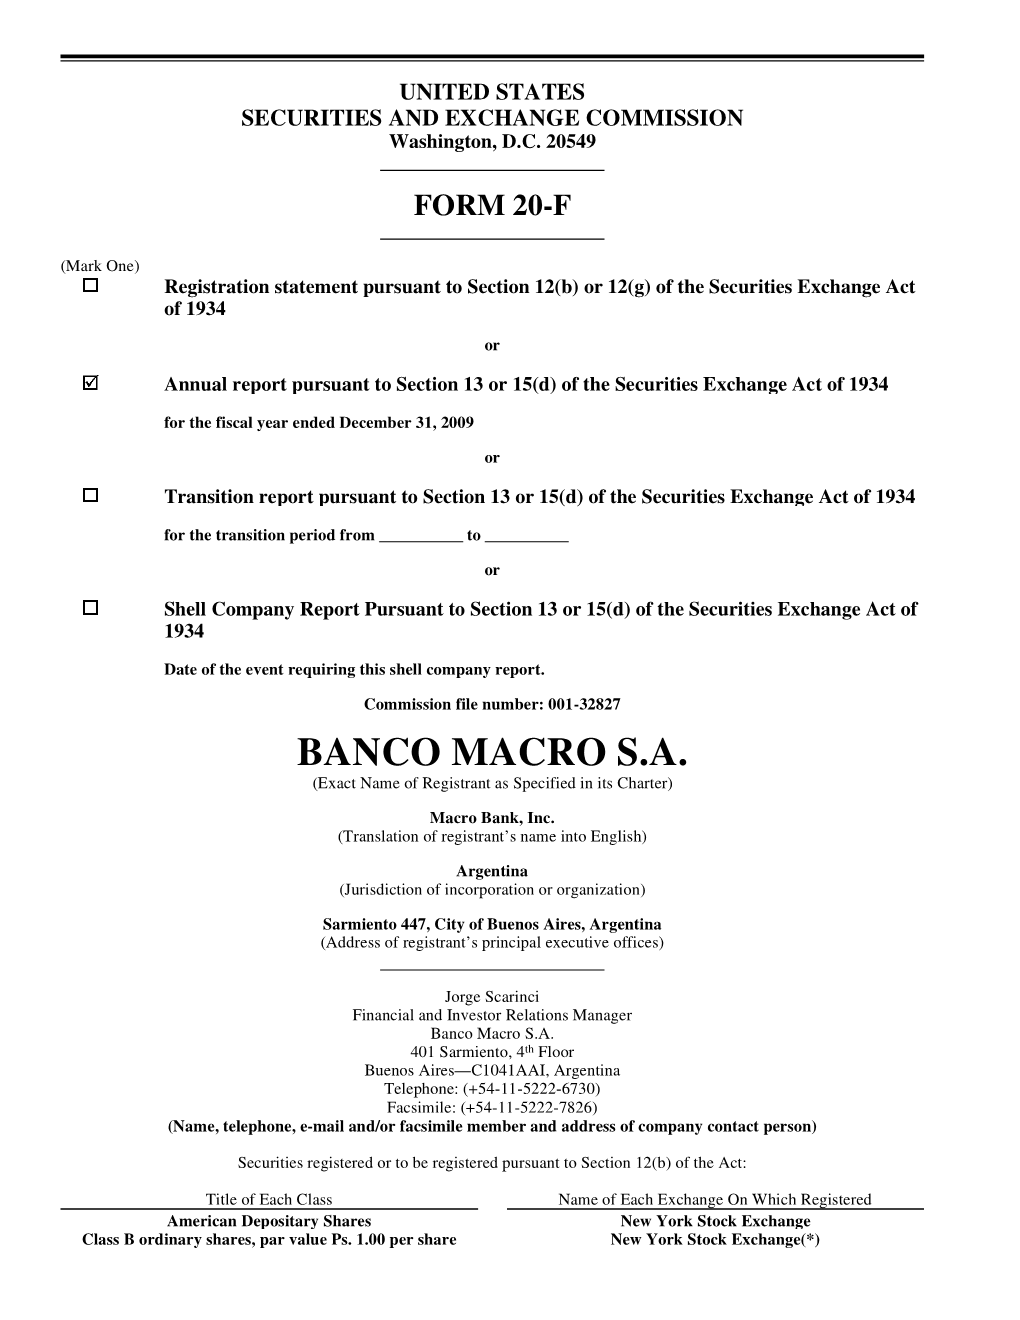 BANCO MACRO S.A. (Exact Name of Registrant As Specified in Its Charter)